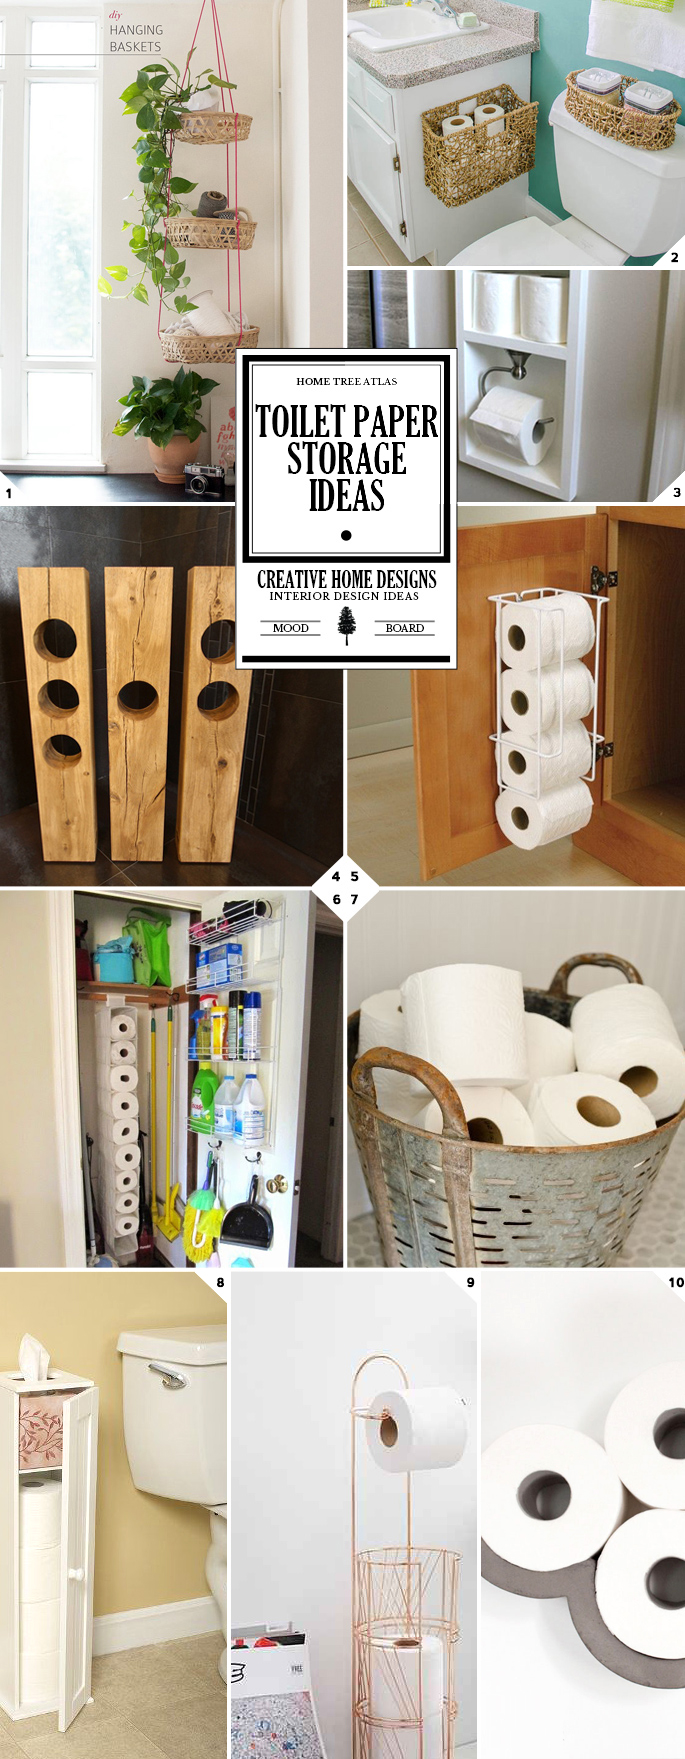 Bathroom toilet paper storage ideas (DIY, and for small spaces)